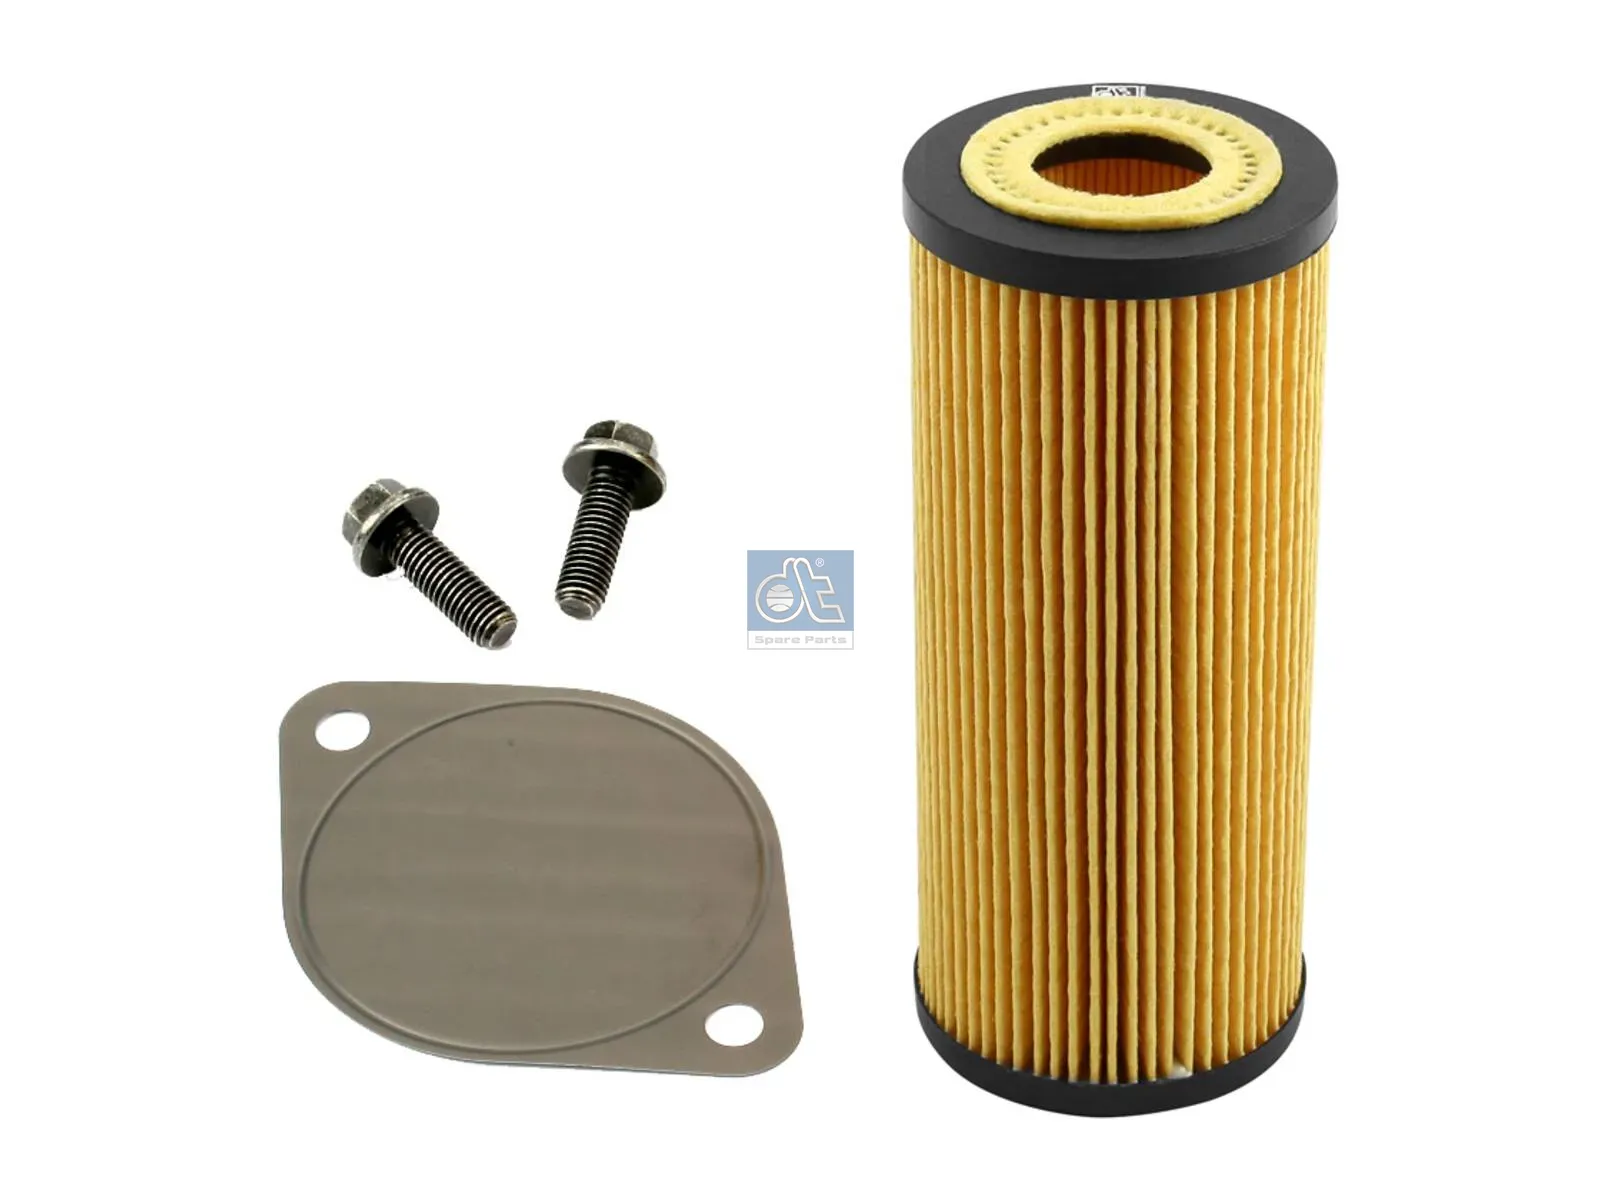 Oil filter kit, gearbox